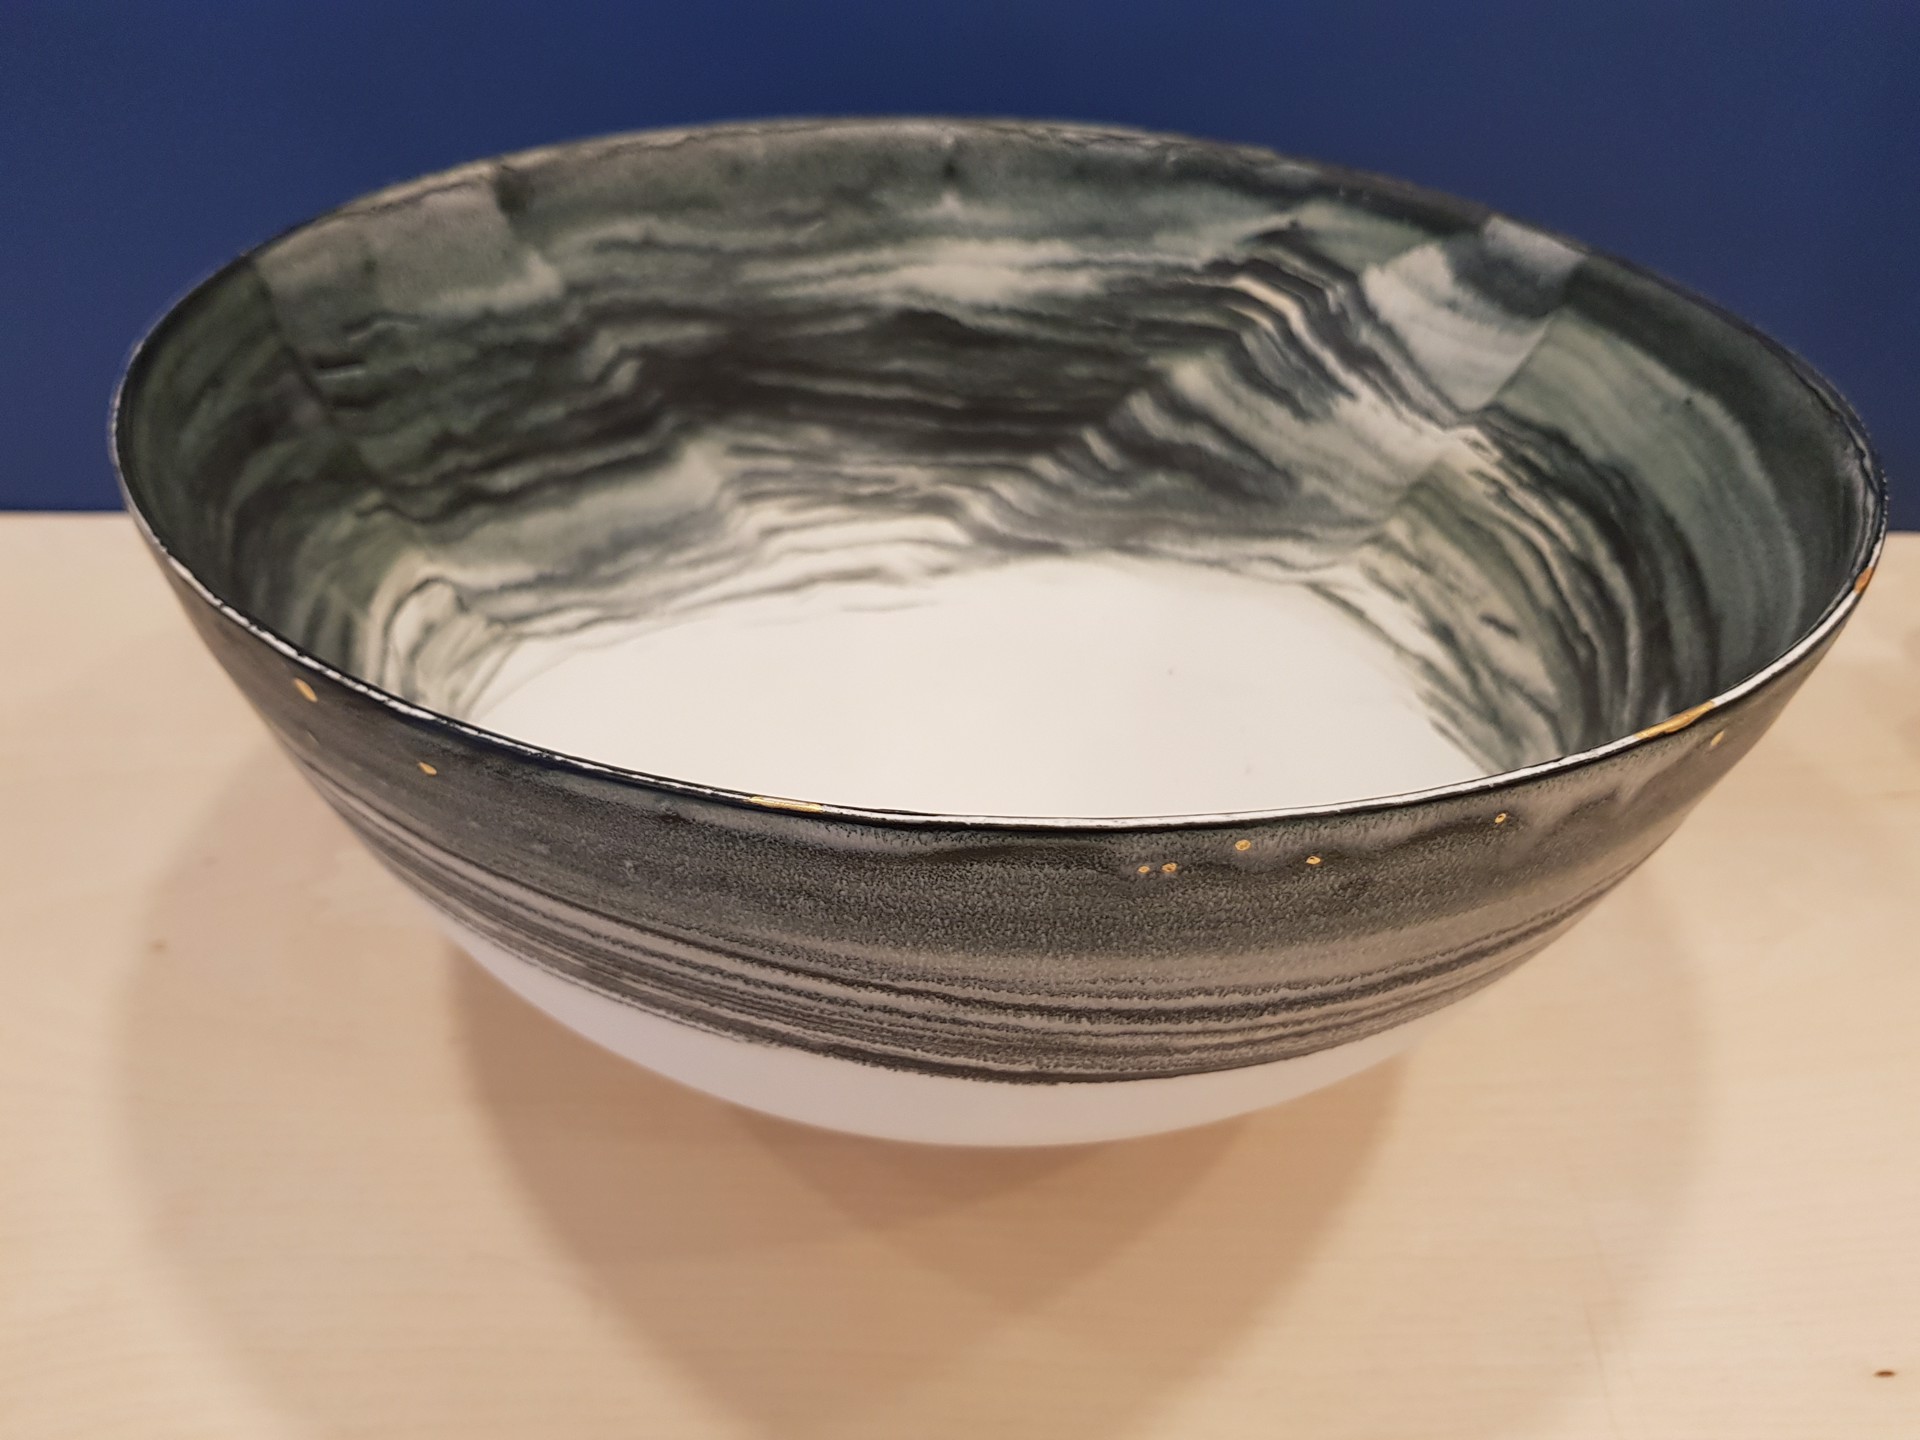 Large Charcoal Topped Bowl by Kyra Cane